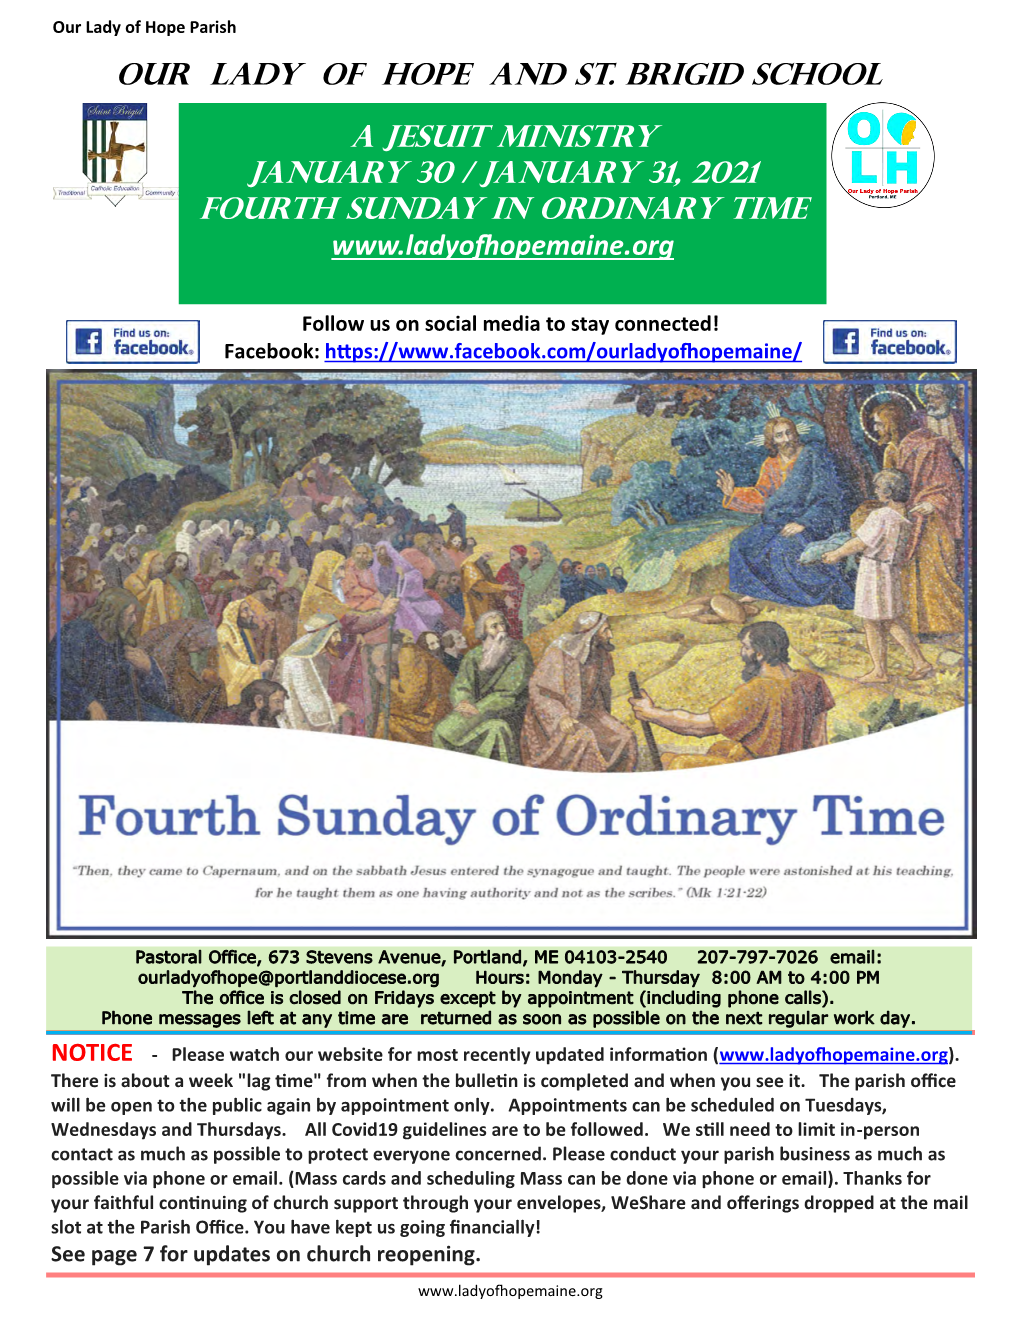 OUR LADY of HOPE and ST. BRIGID SCHOOL a Jesuit Ministry January 30 / January 31, 2021 Fourth Sunday in Ordinary Time